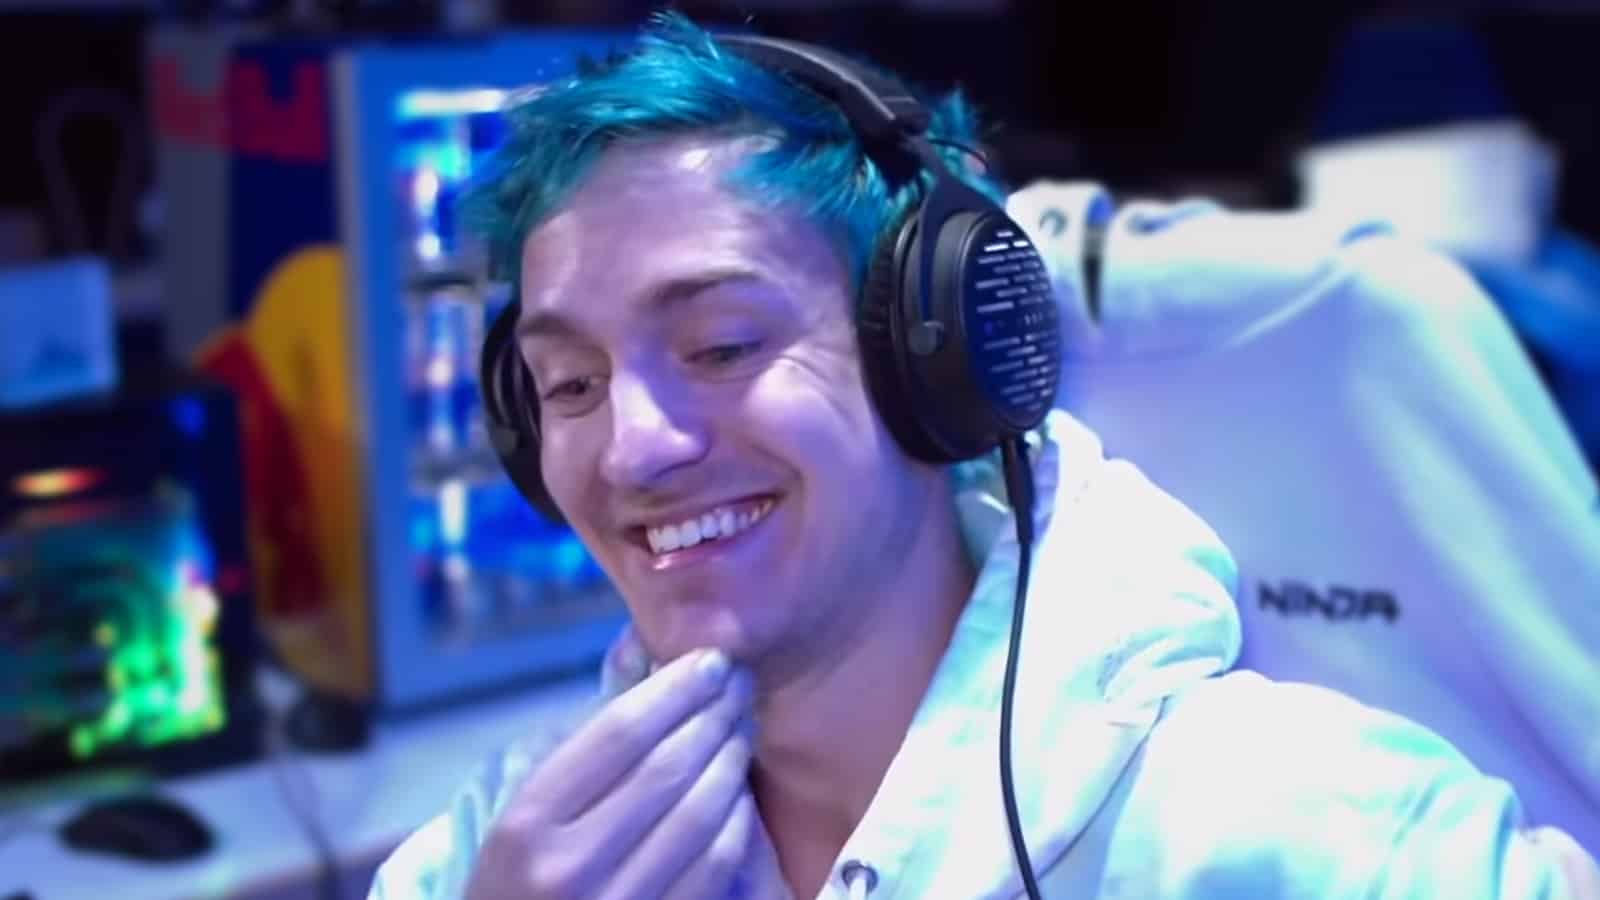 Ninja smiles into camera after Twitch claims